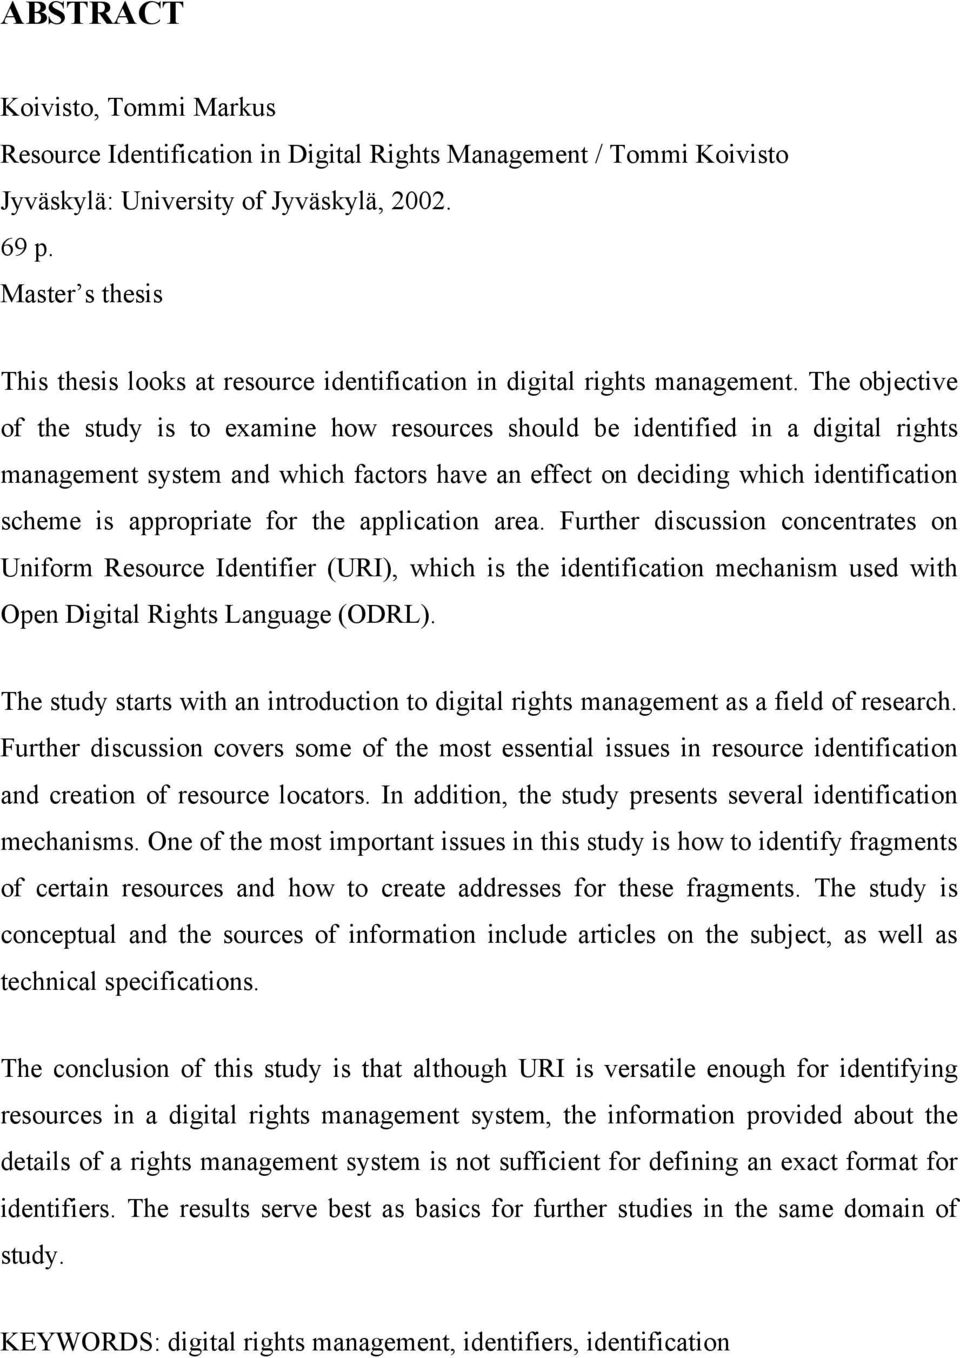 The objective of the study is to examine how resources should be identified in a digital rights management system and which factors have an effect on deciding which identification scheme is